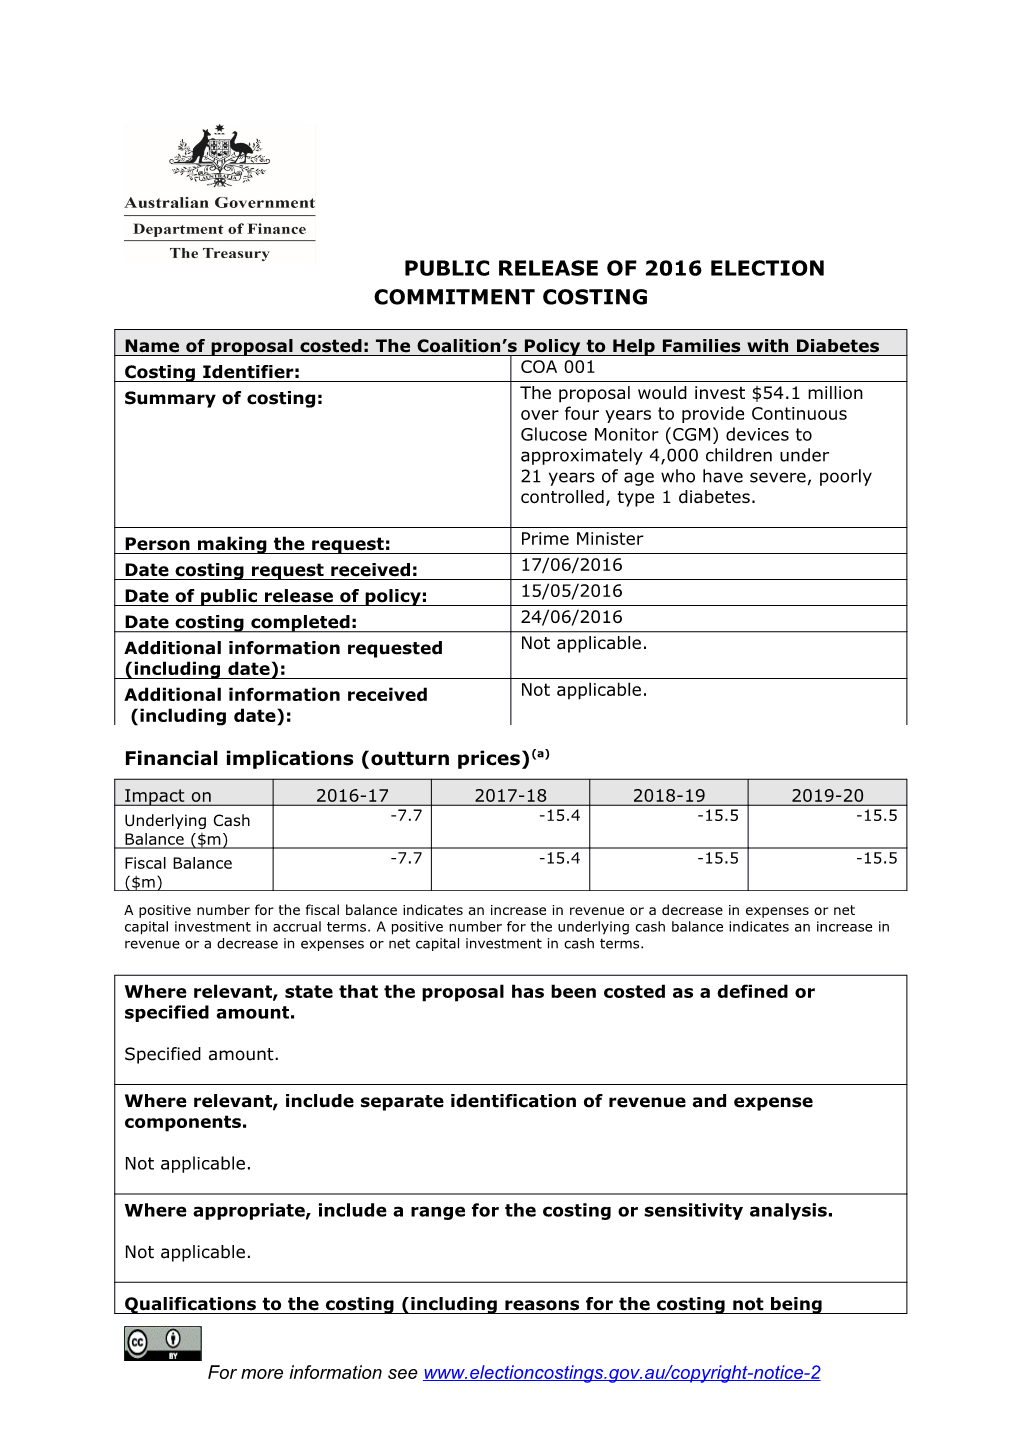 Public Release of 2016 Election Commitment Costing